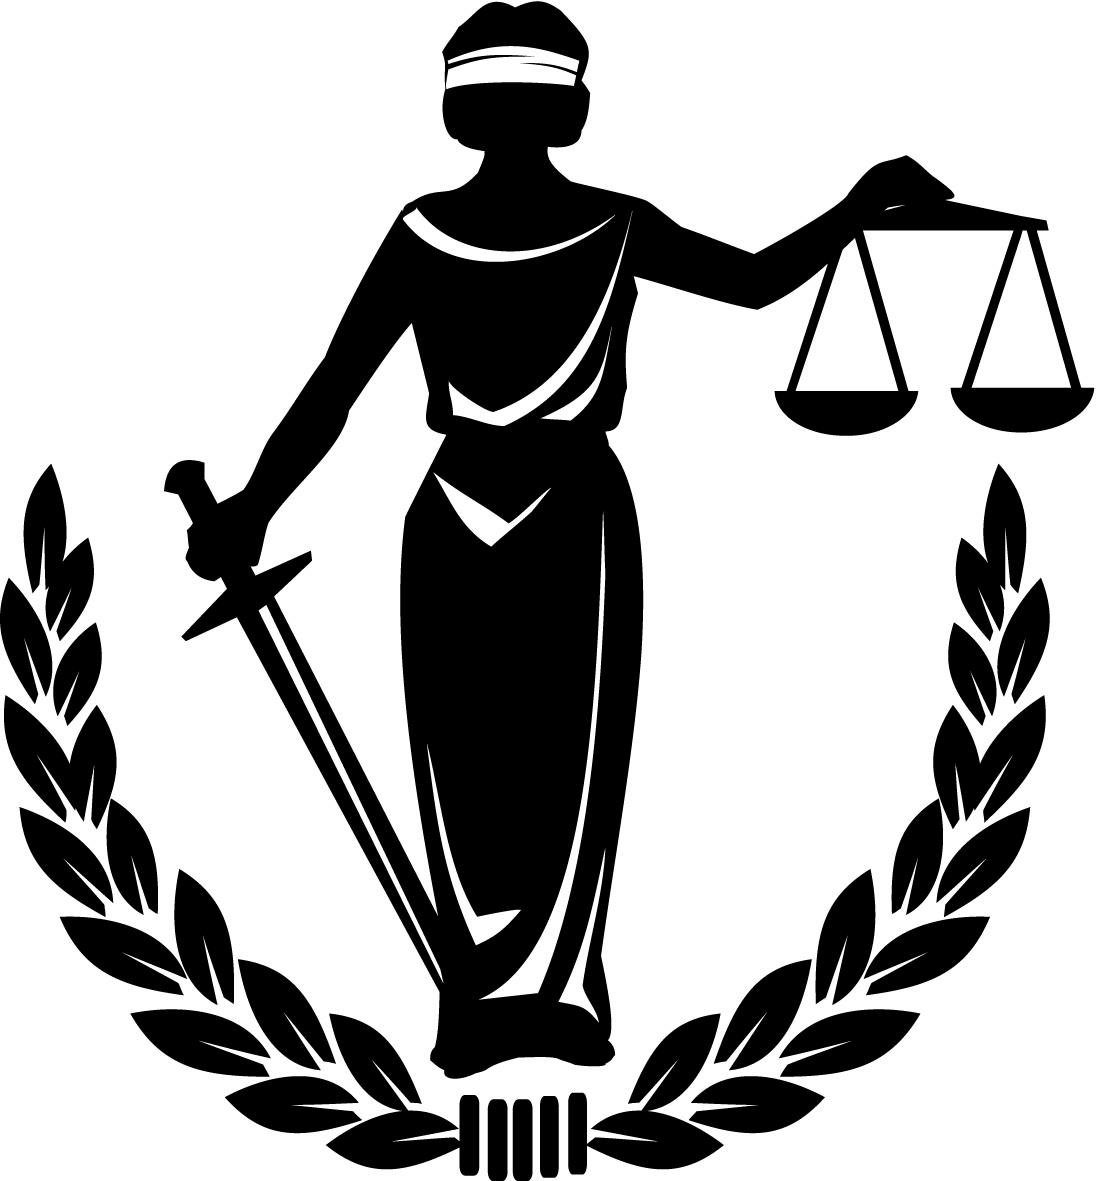 Judge clipart doctor lawyer. Justice google search blonde